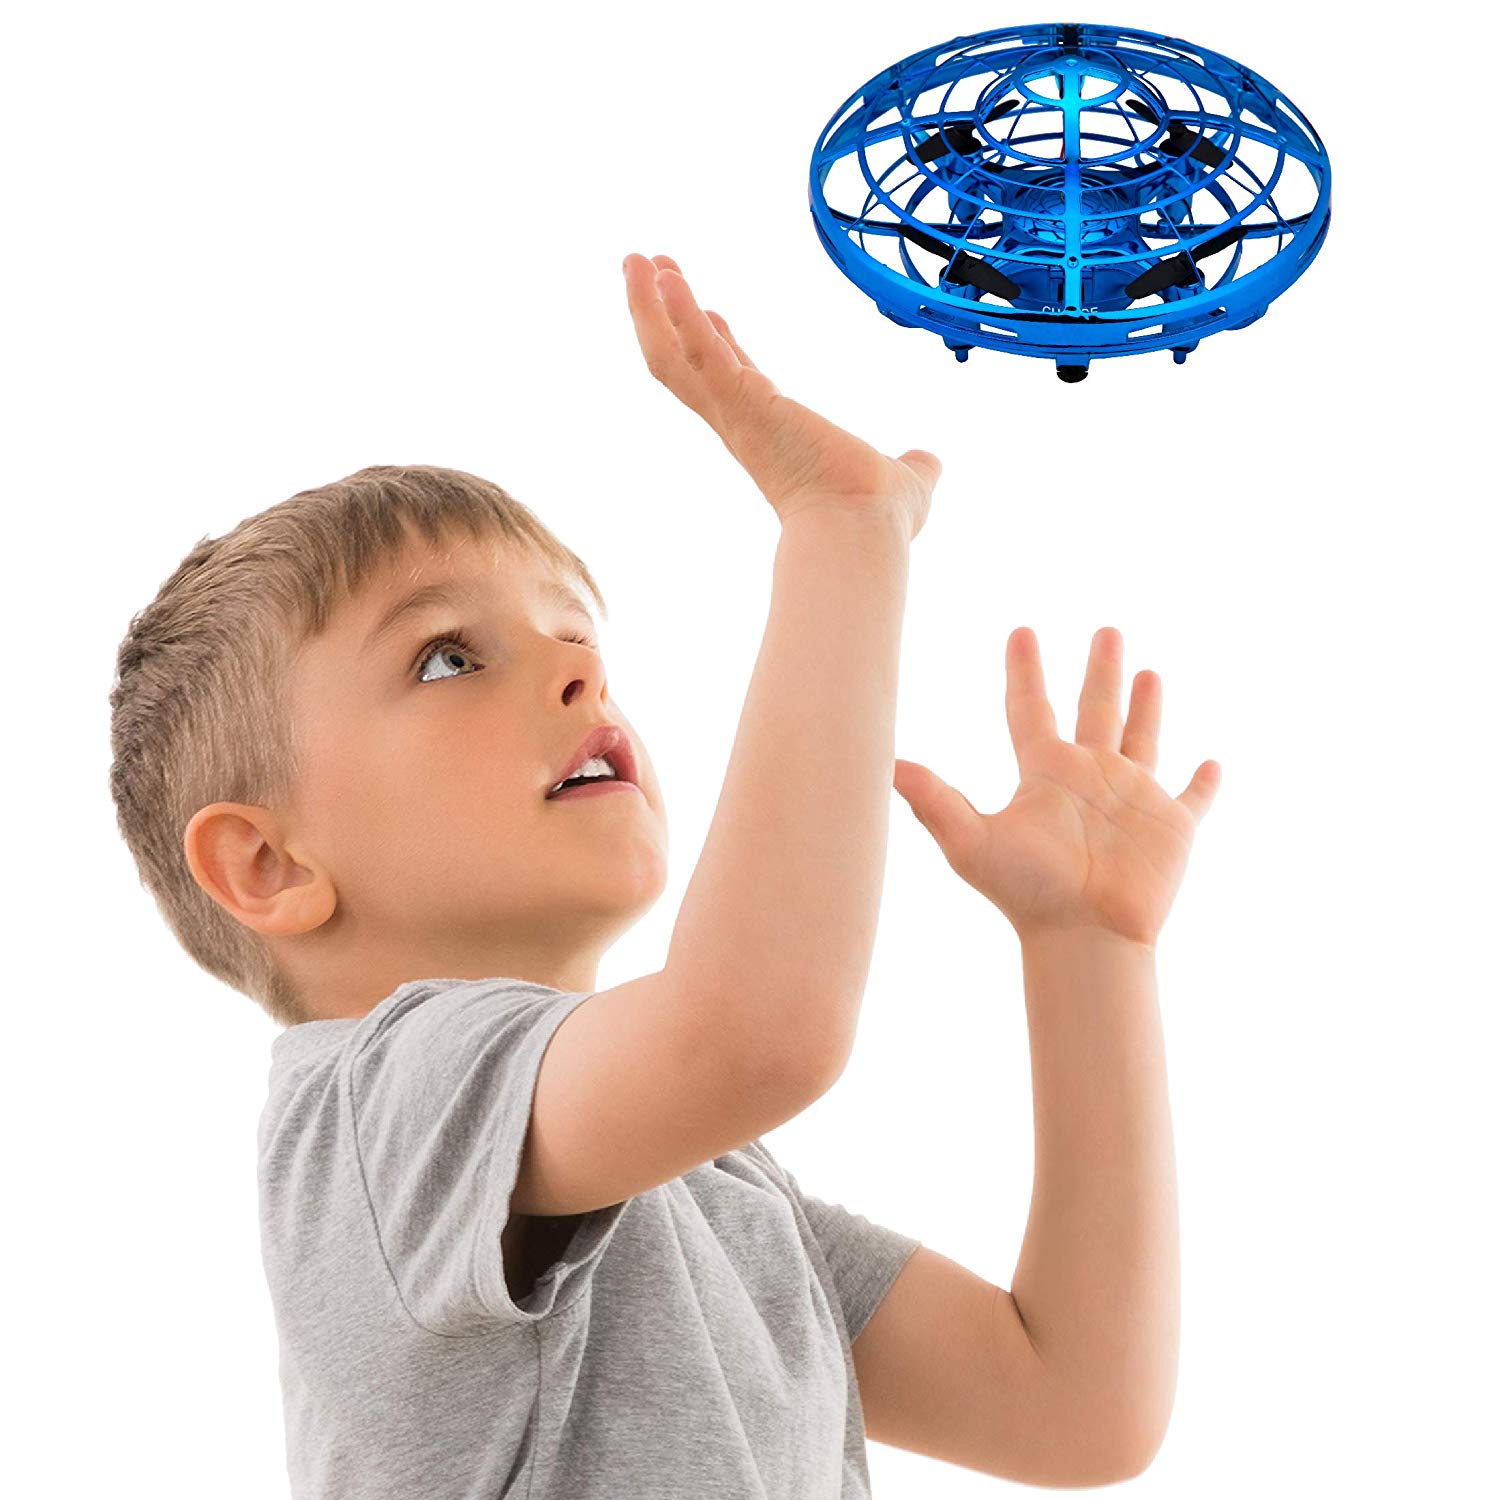 Review of Hand Operated Drones for Kids or Adults - Scoot Hands Free Mini Drone Helicopter